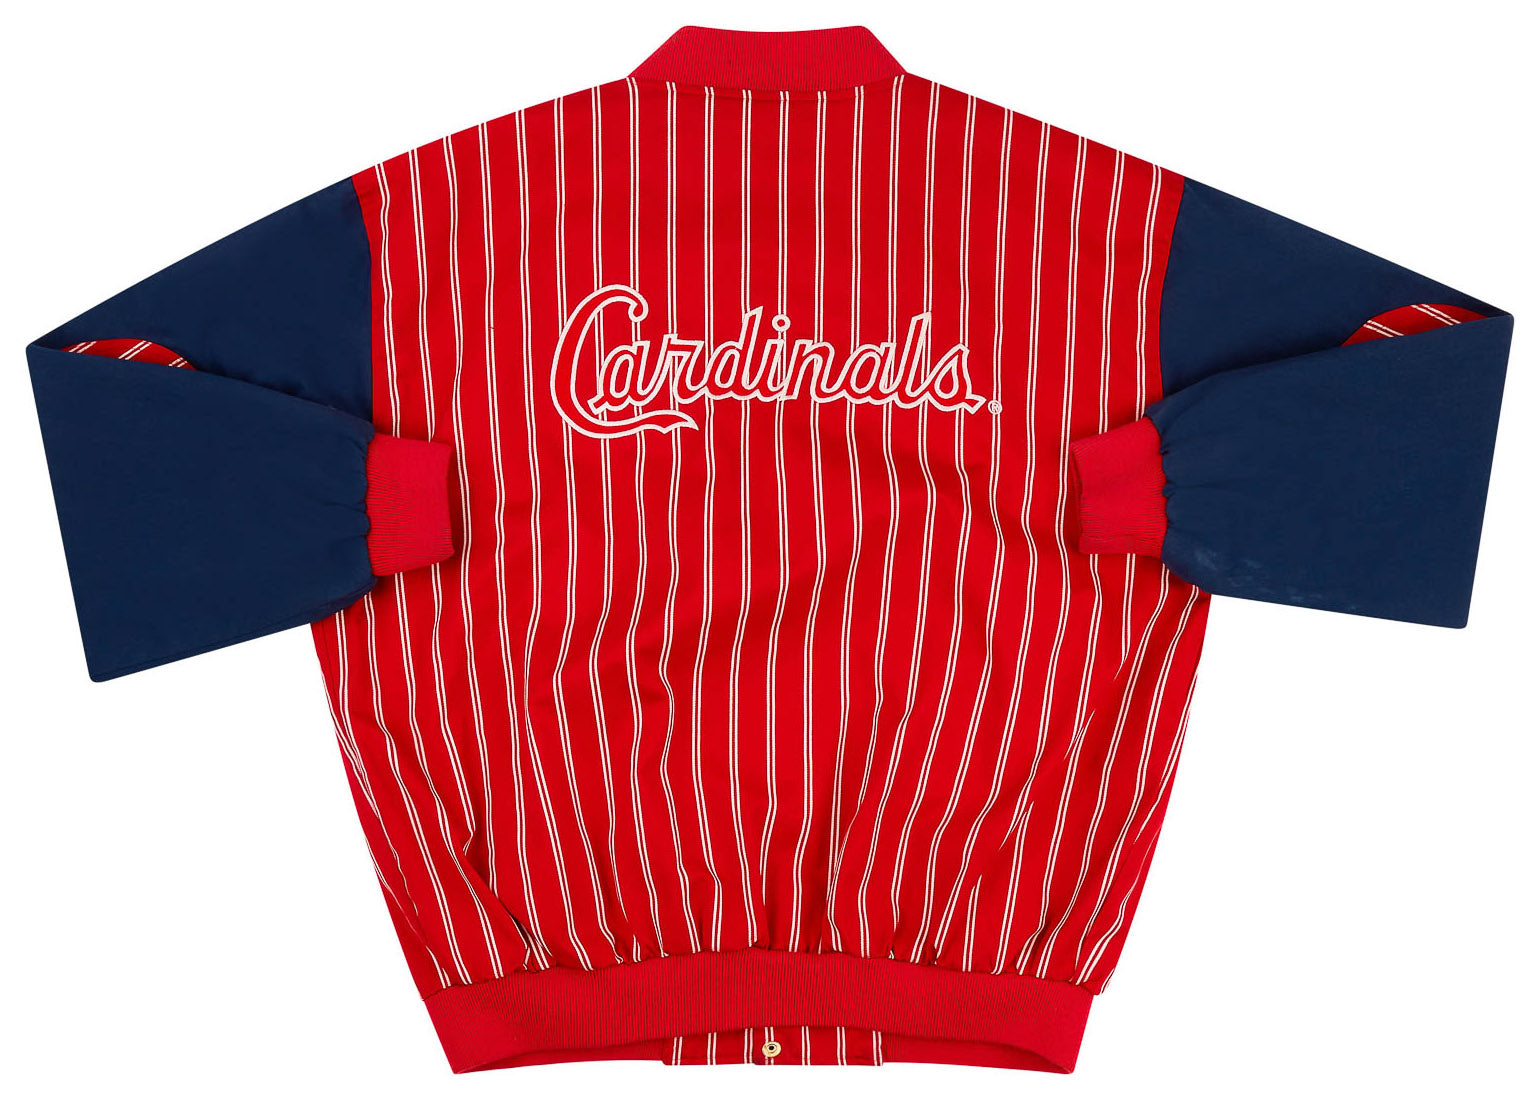 1944 00's retro St. Louis Cardinals Majestic Cooperstown